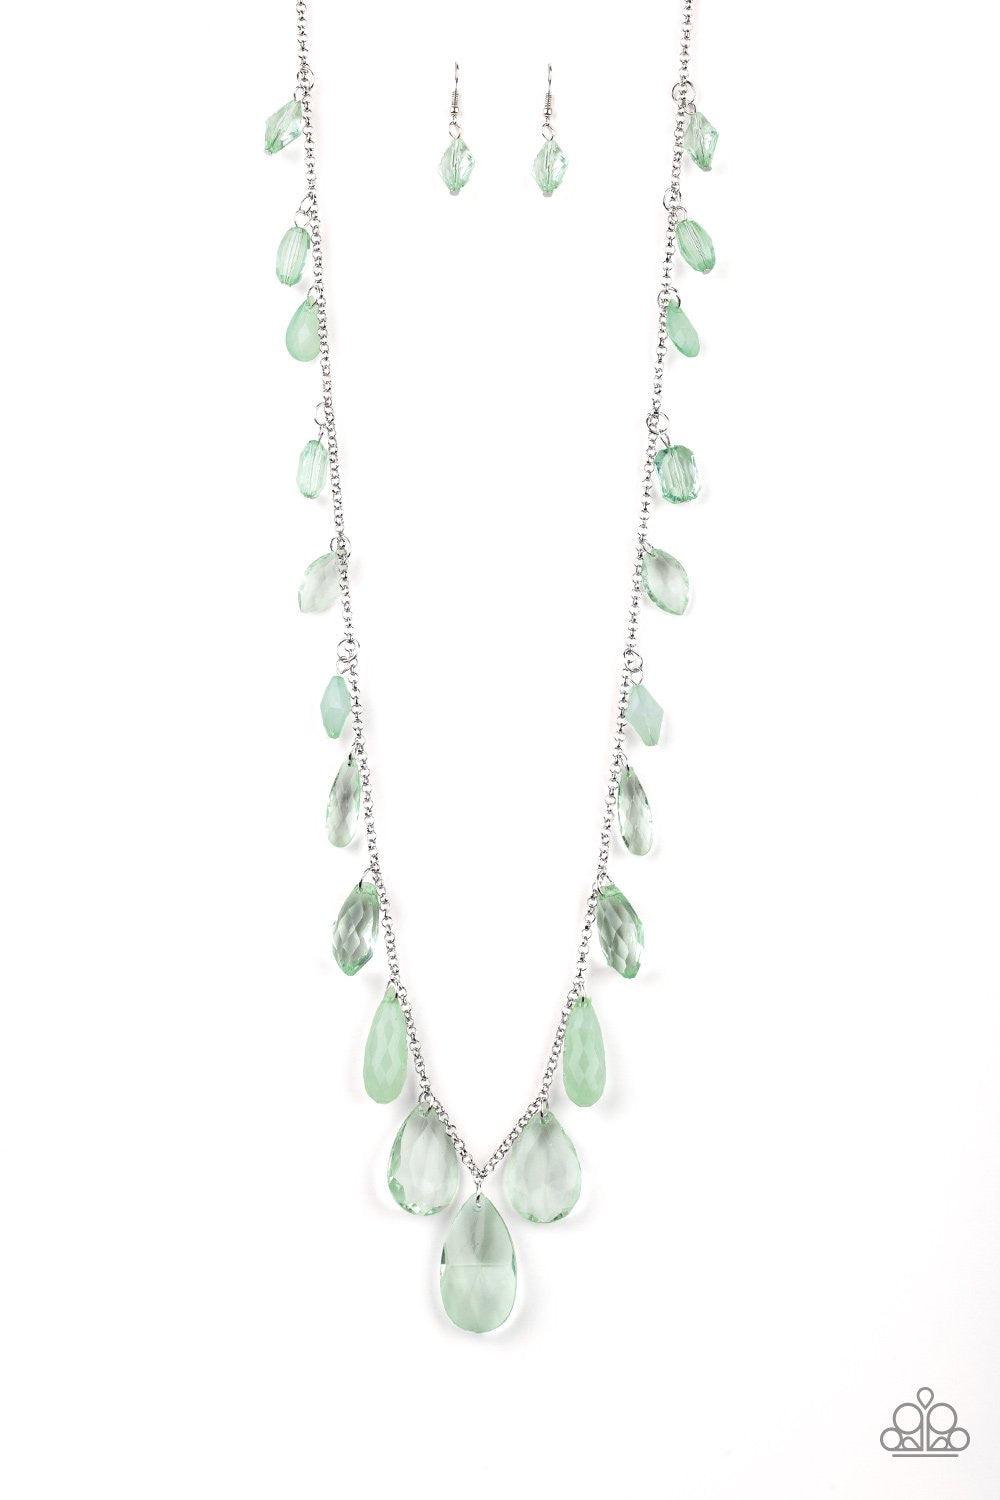 Paparazzi Accessories Glow And Steady Wins The Race - Green A gorgeous collection of glassy and cloudy green crystal-like beads trickle along a shimmery silver chain down the chest in a whimsical fashion. Features an adjustable clasp closure. Jewelry